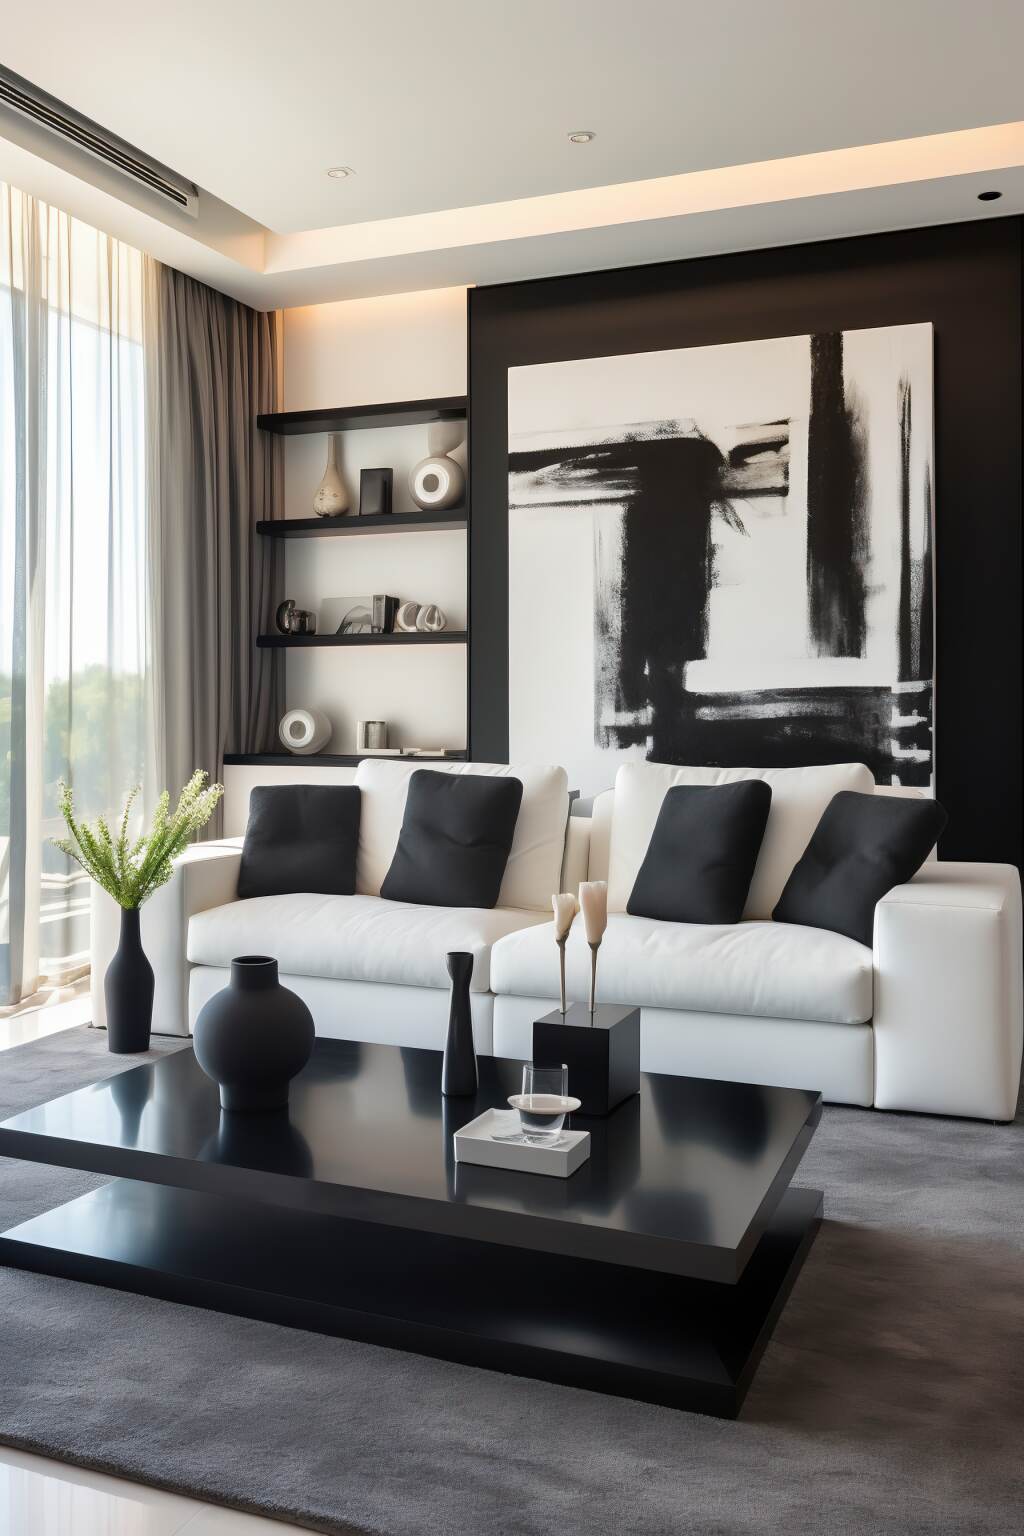 Modern Living Room Captivates With Its Black And White